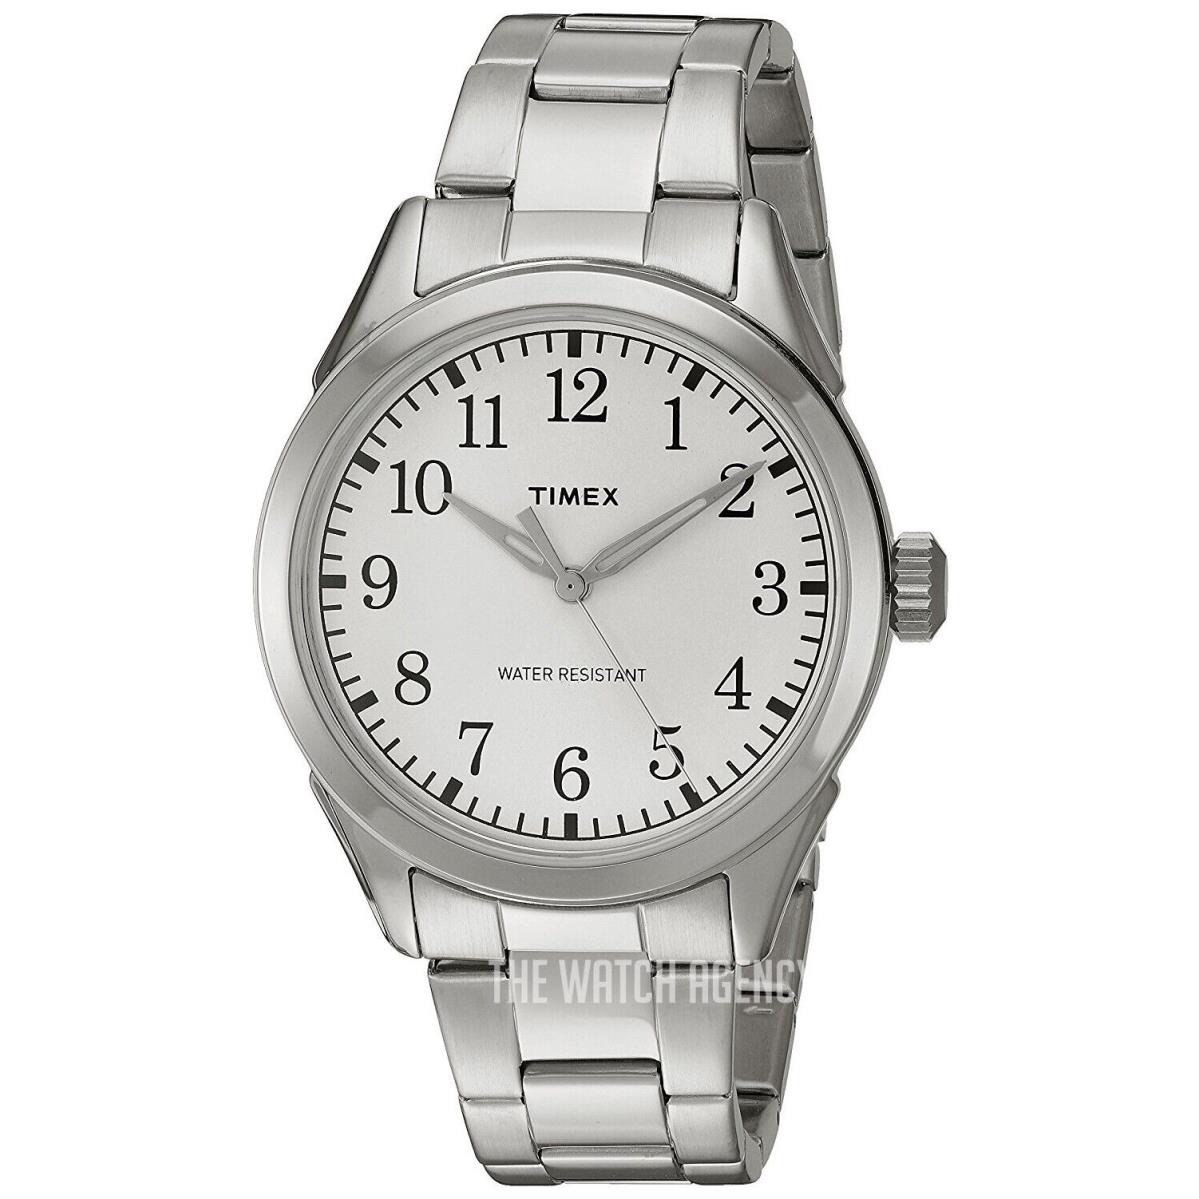 Timex Briarwood Terrace Stainless Steel Band Men s Watch TW2P99800